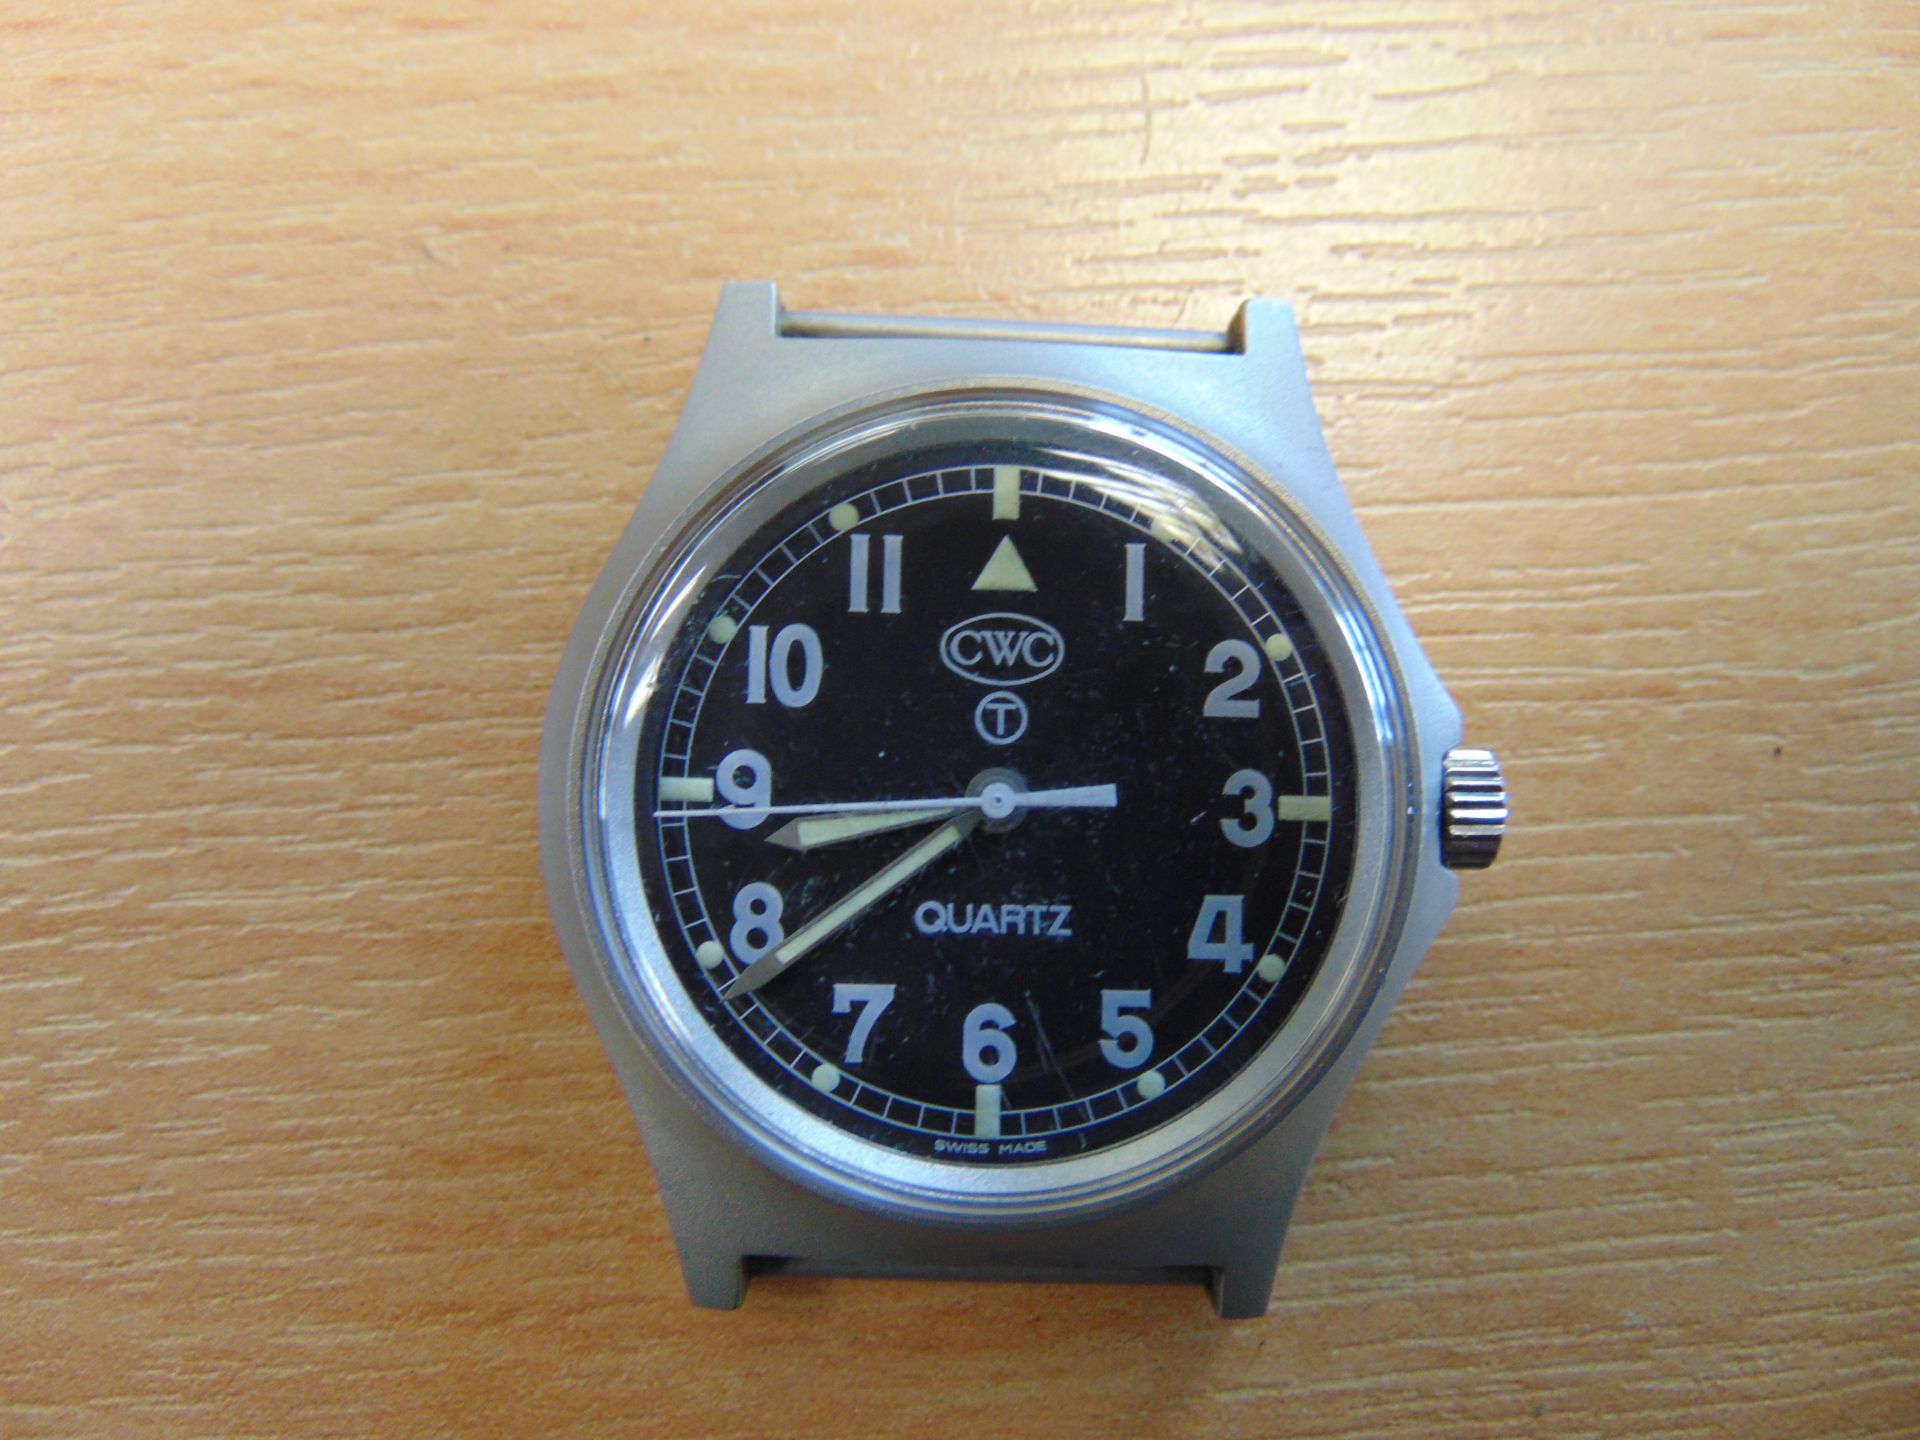 V Rare Unissued CWC (Cabot Watch Co Switzerland) 0552 Royal Marines / Navy Issue Service Watch 1990 - Image 2 of 4